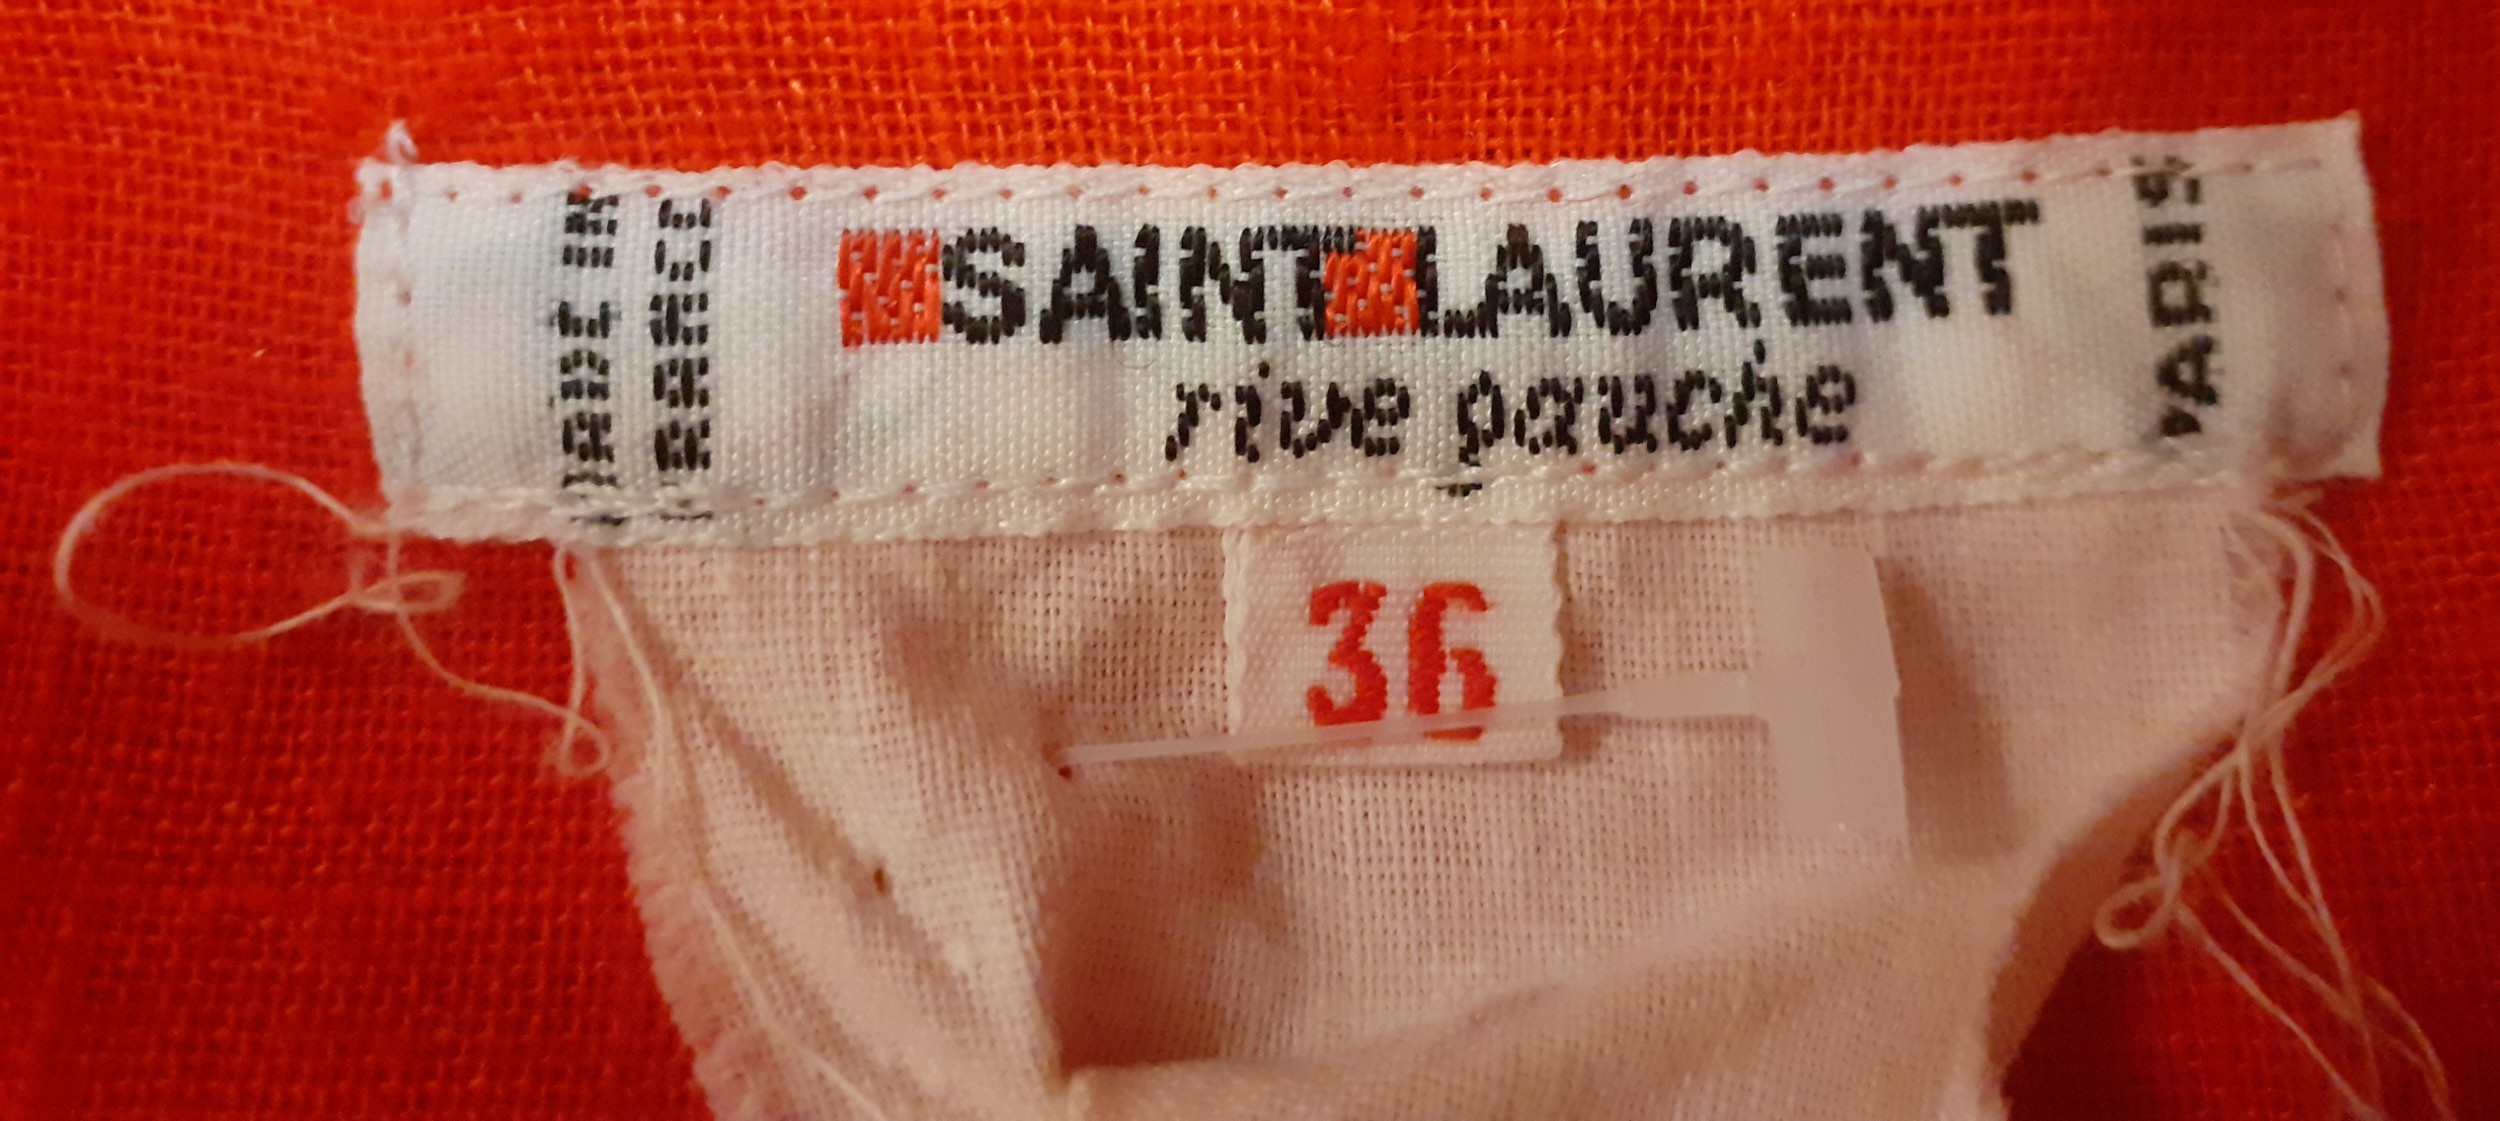 YSL-A Saint Laurent Rive Gauche red ruched top with shoulder straps and side zip, European size 36 - Image 18 of 18